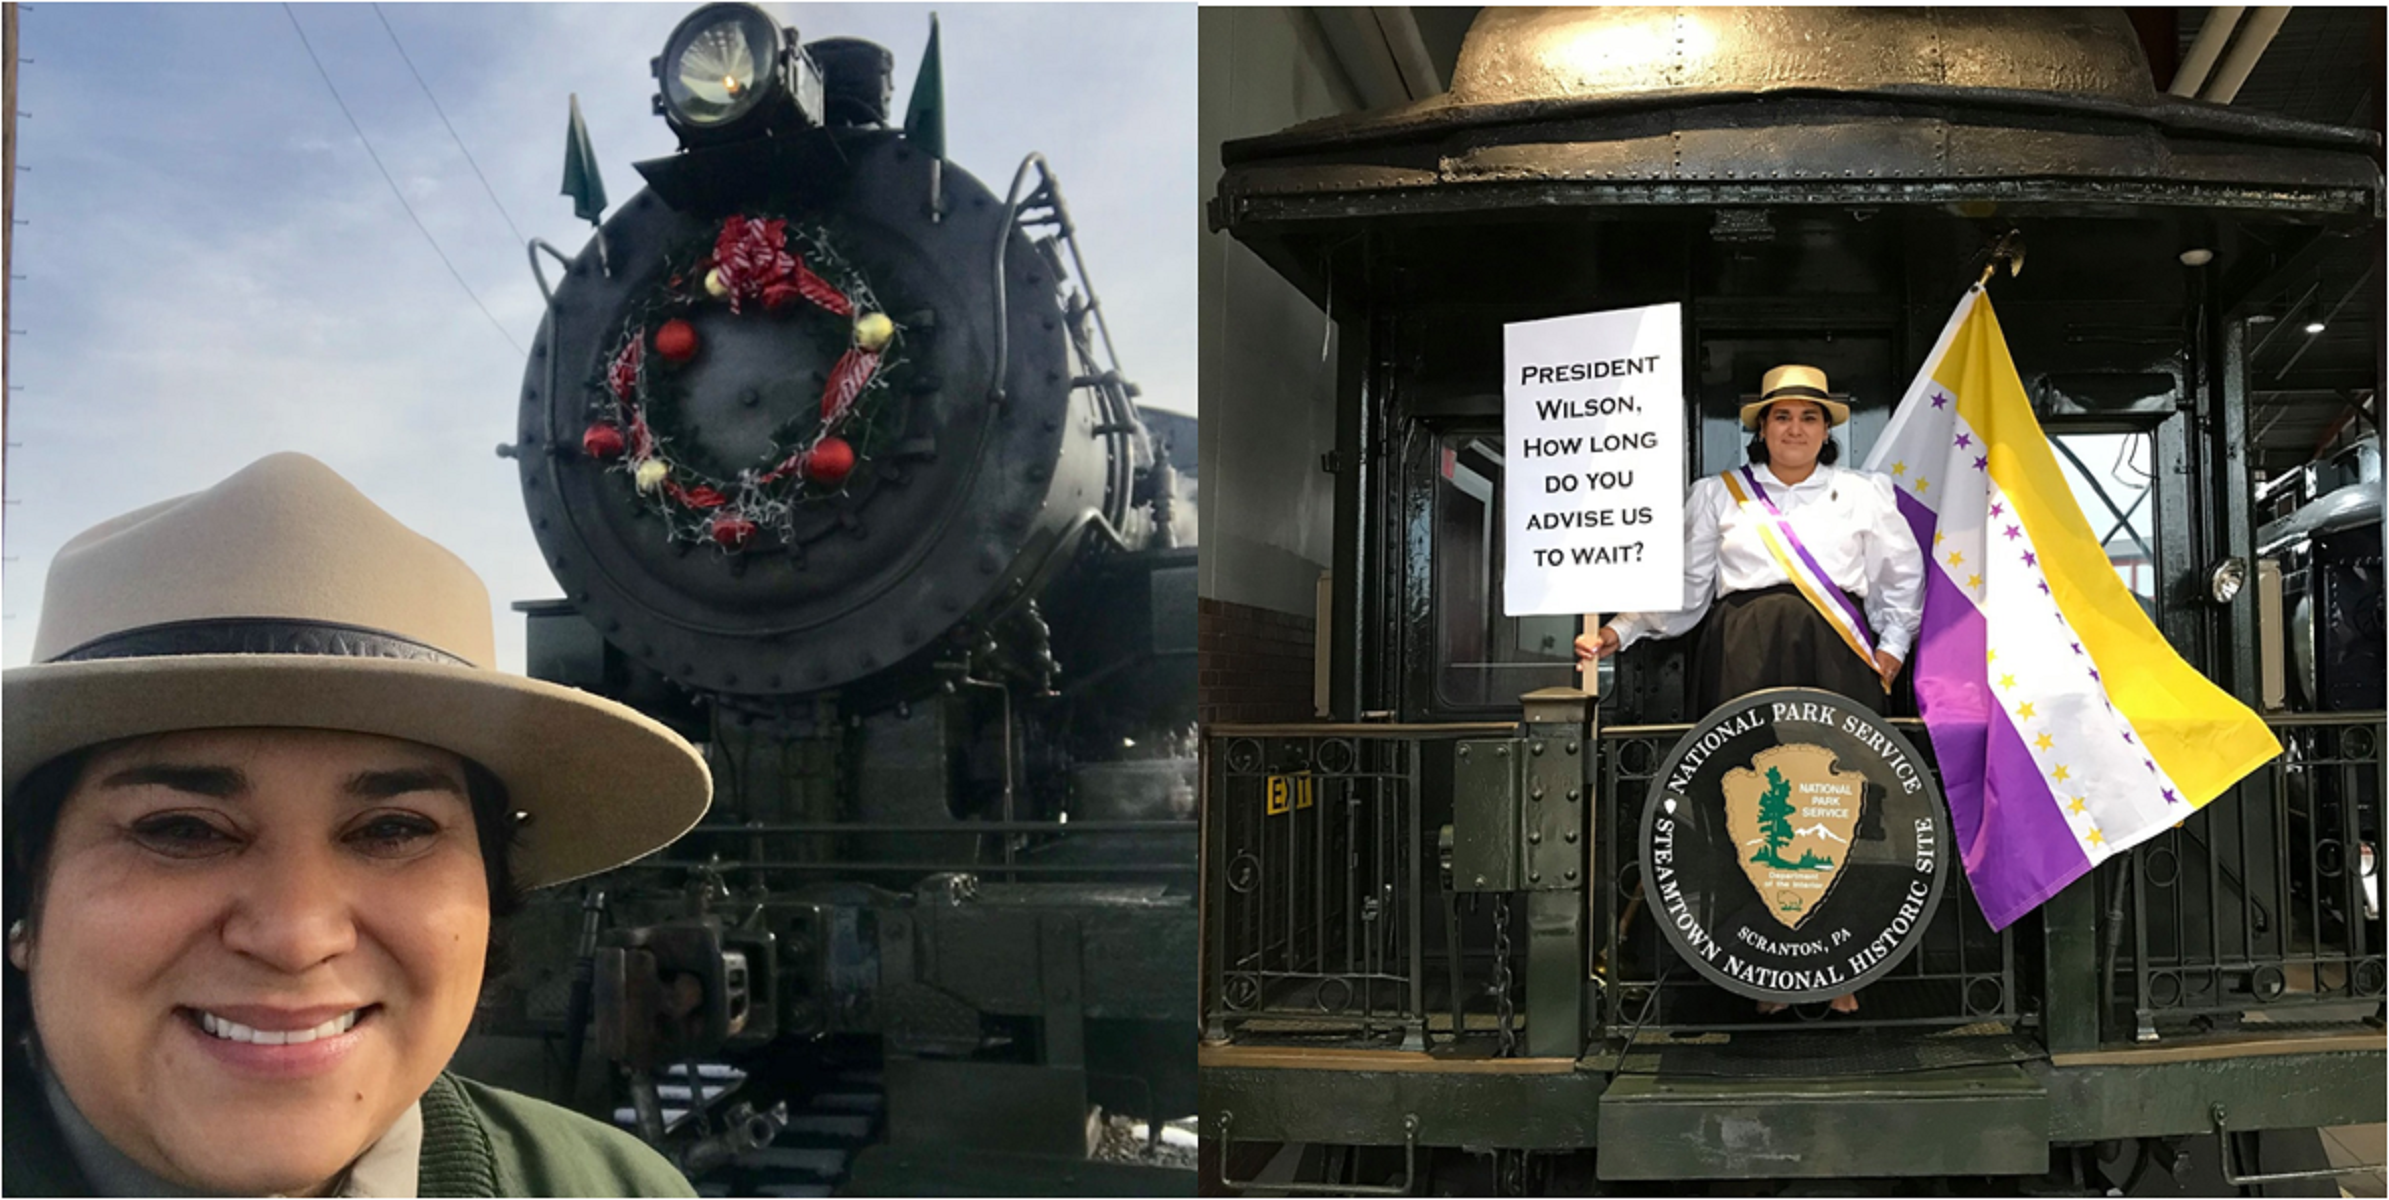 two images side by side of park ranger Flor on duty at steamtown nhs. Left image is up close of smiling face and wearing ranger hat with a train in the background. Right picture Flor is dressed in 1900s clothing standing on train platform.